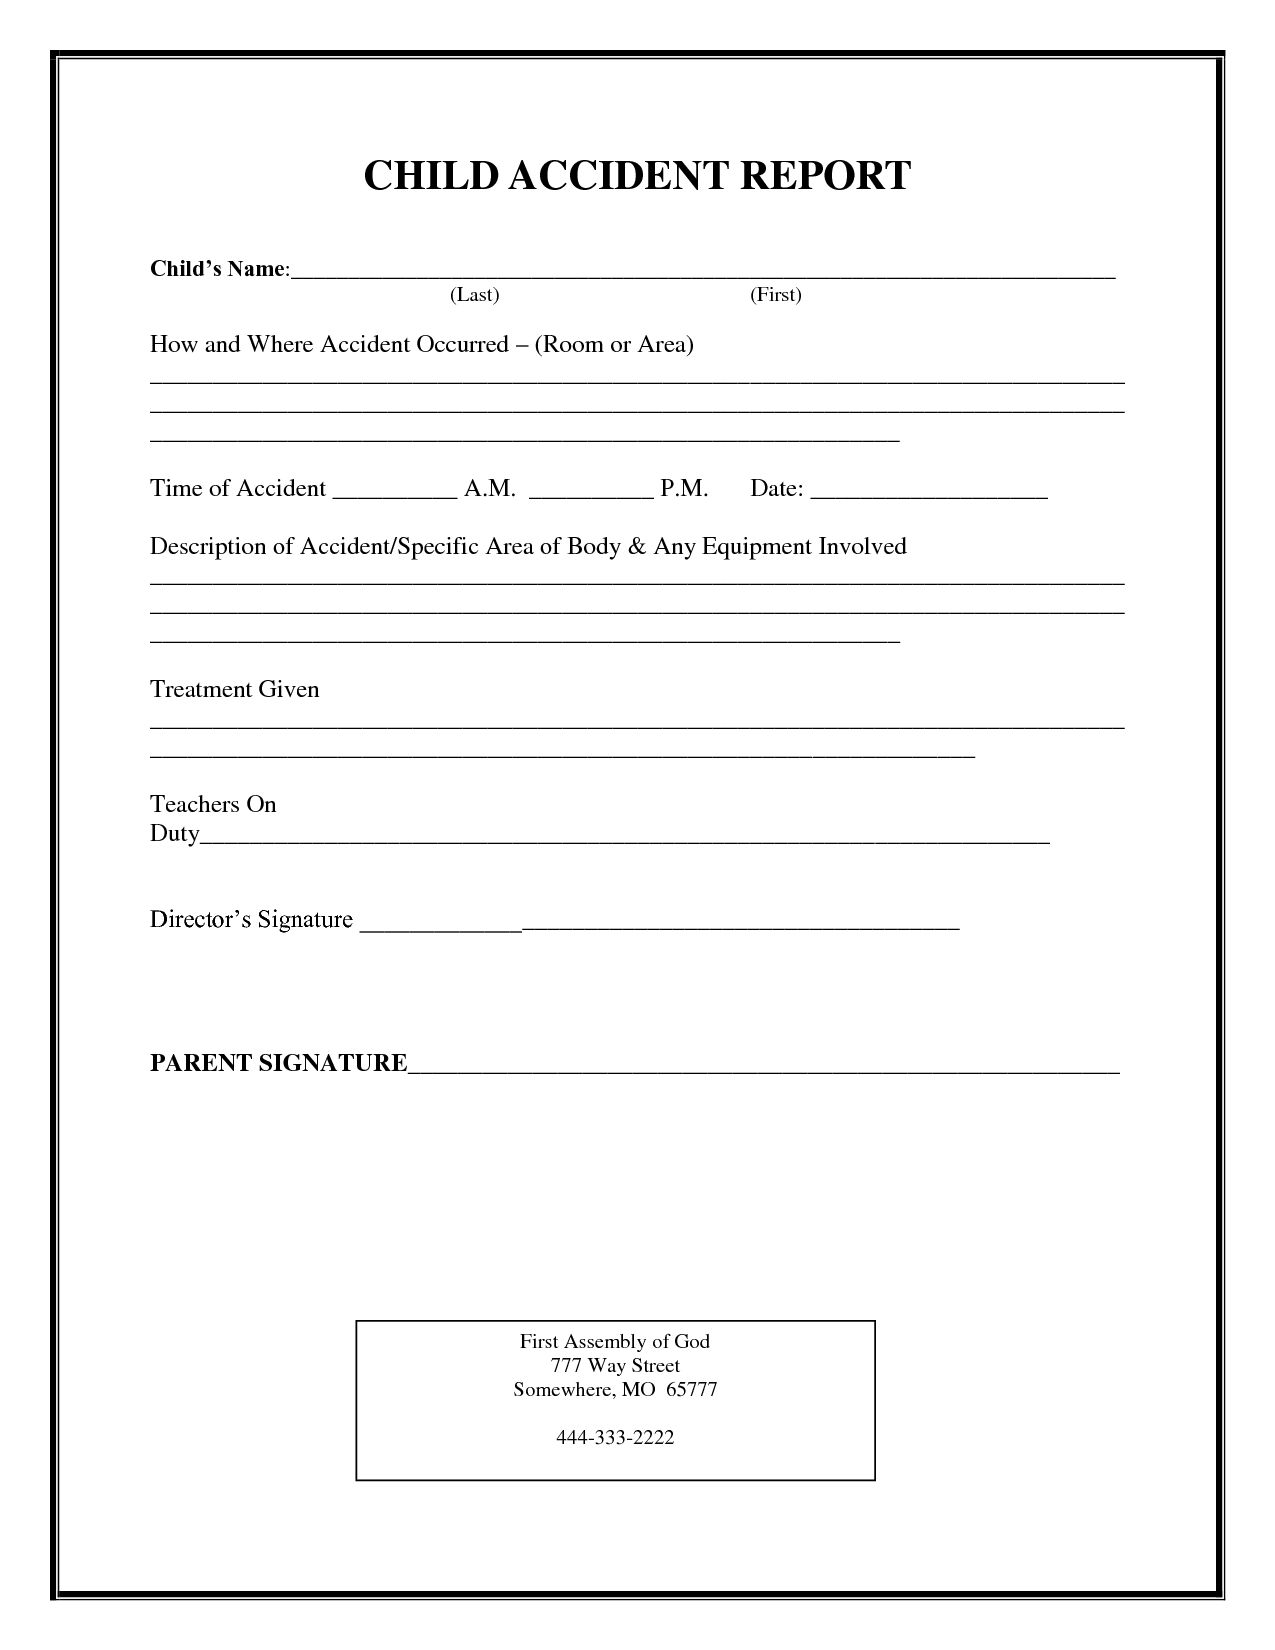 Incident Report Form Child Care | Child Accident Report In School Incident Report Template